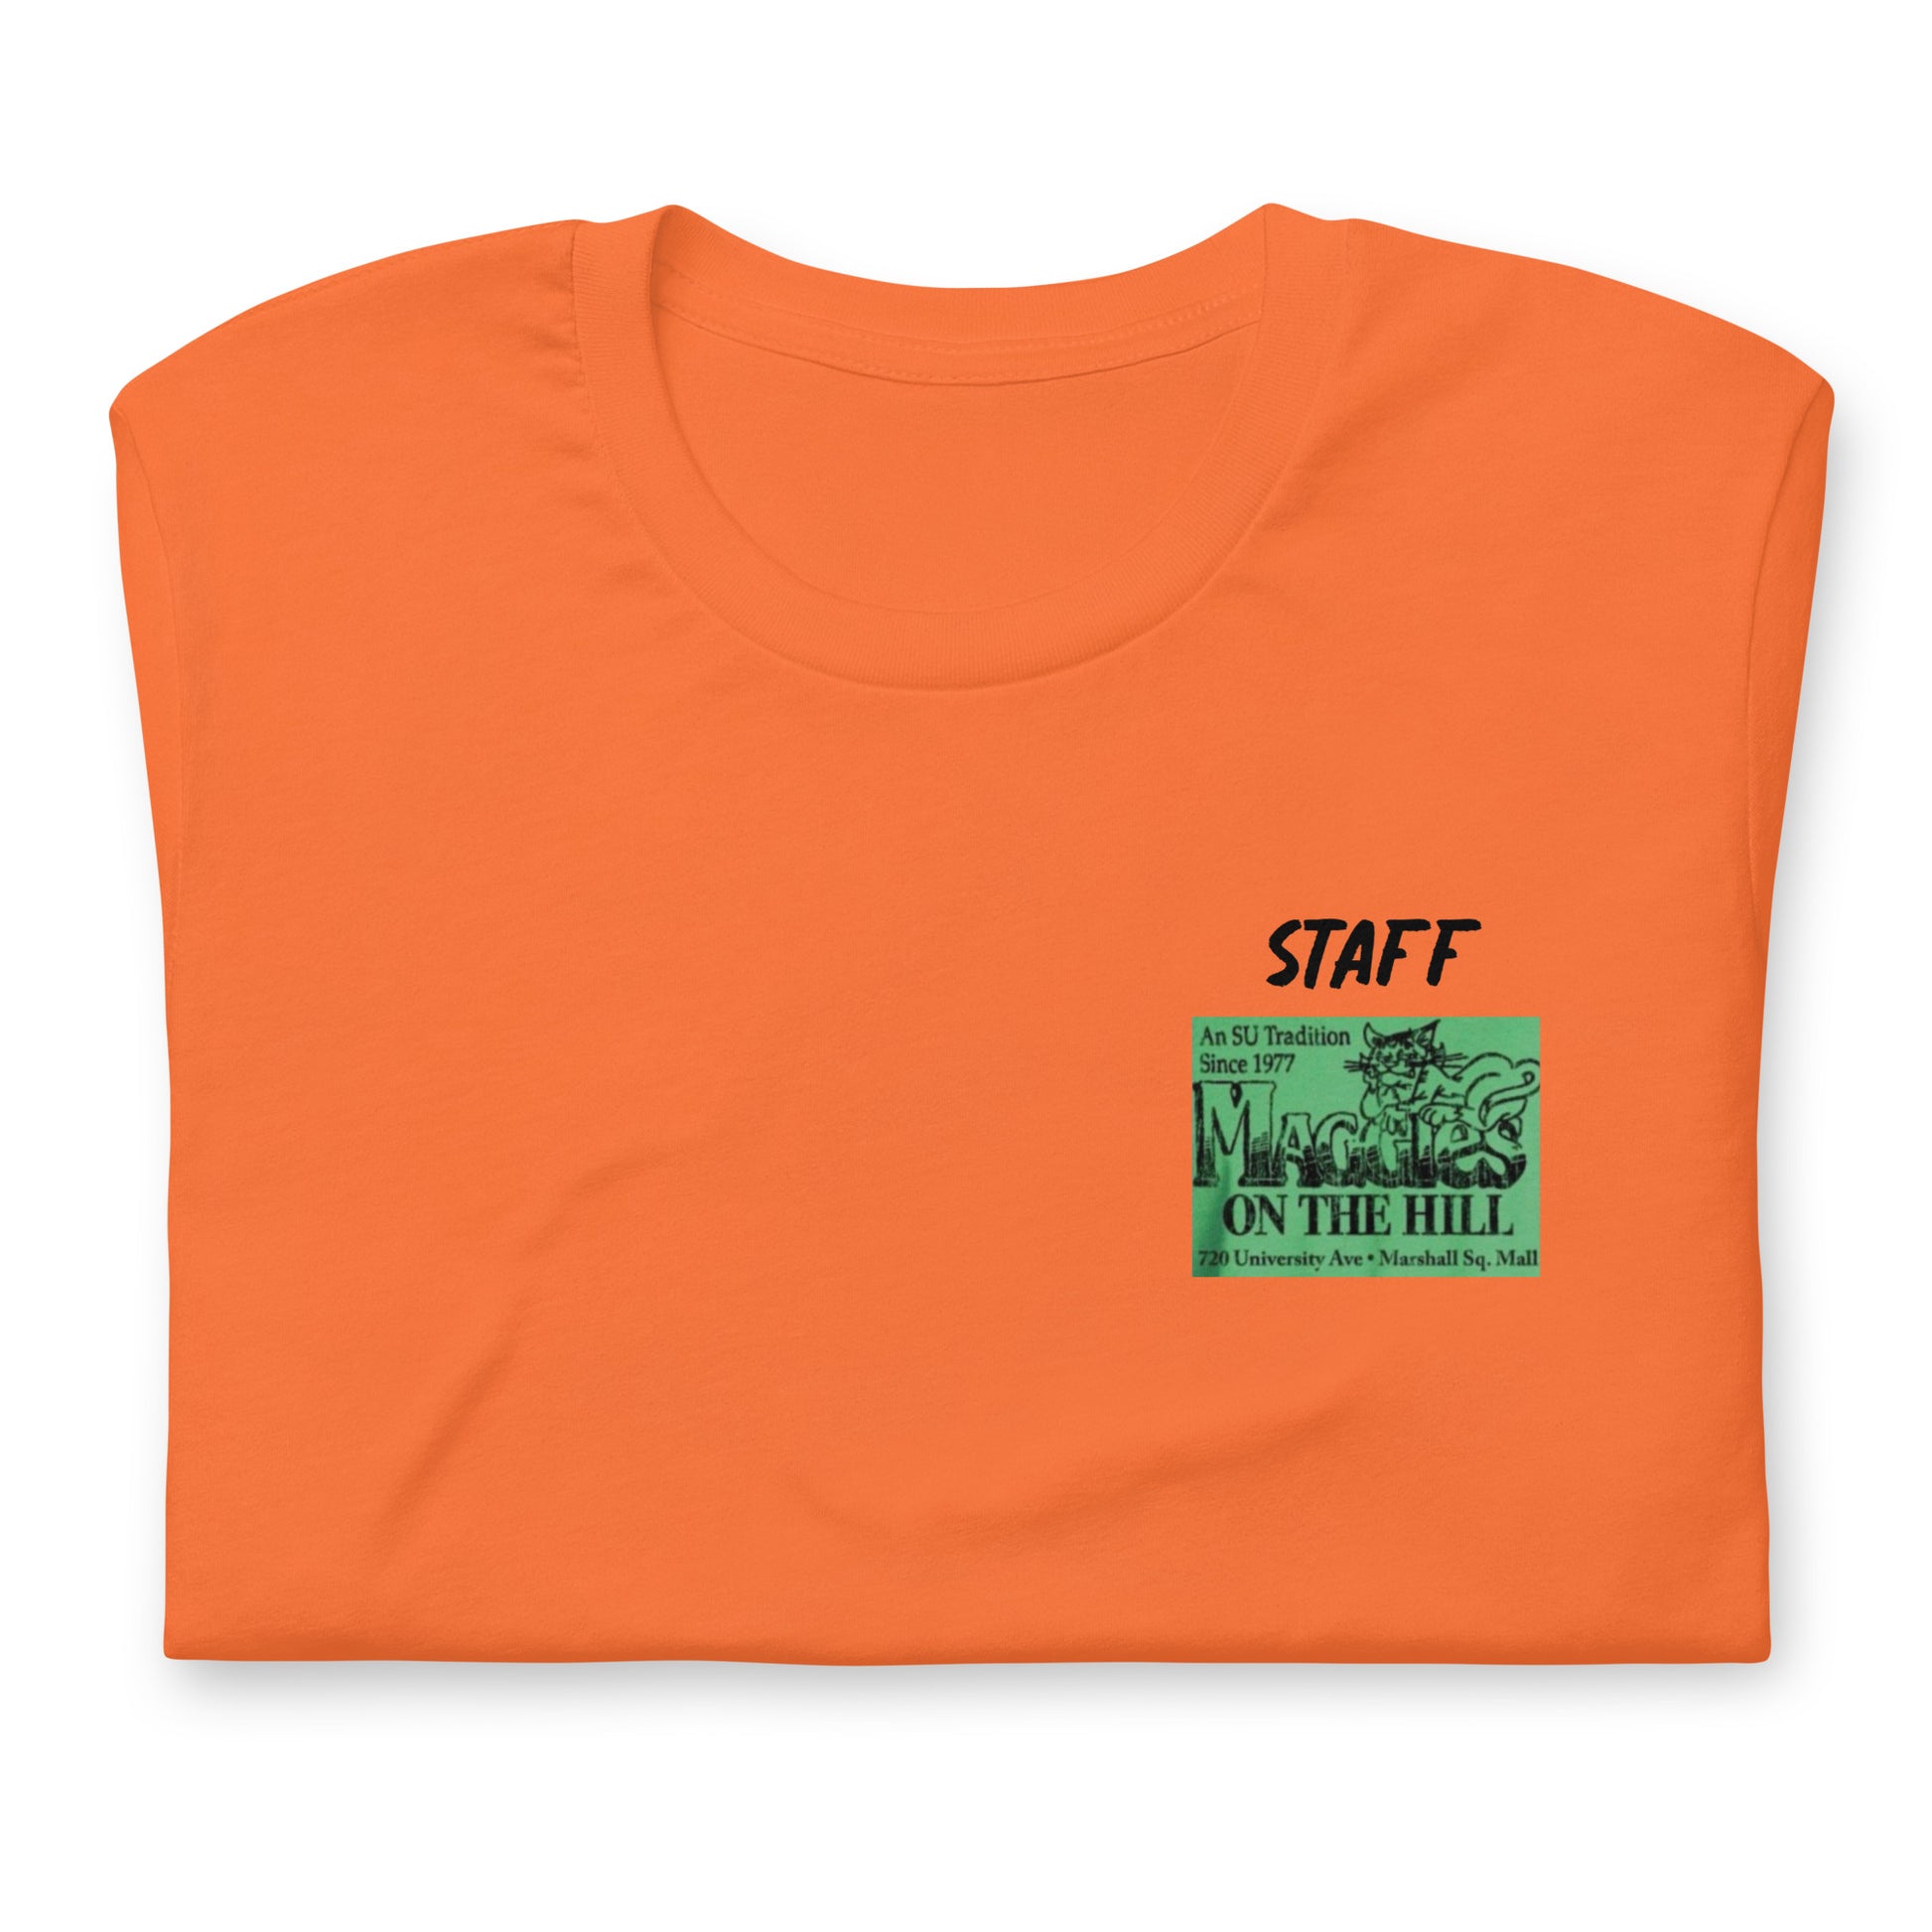 Orange tee shirt that says 'Maggie's on the Hill - Staff' in green and black